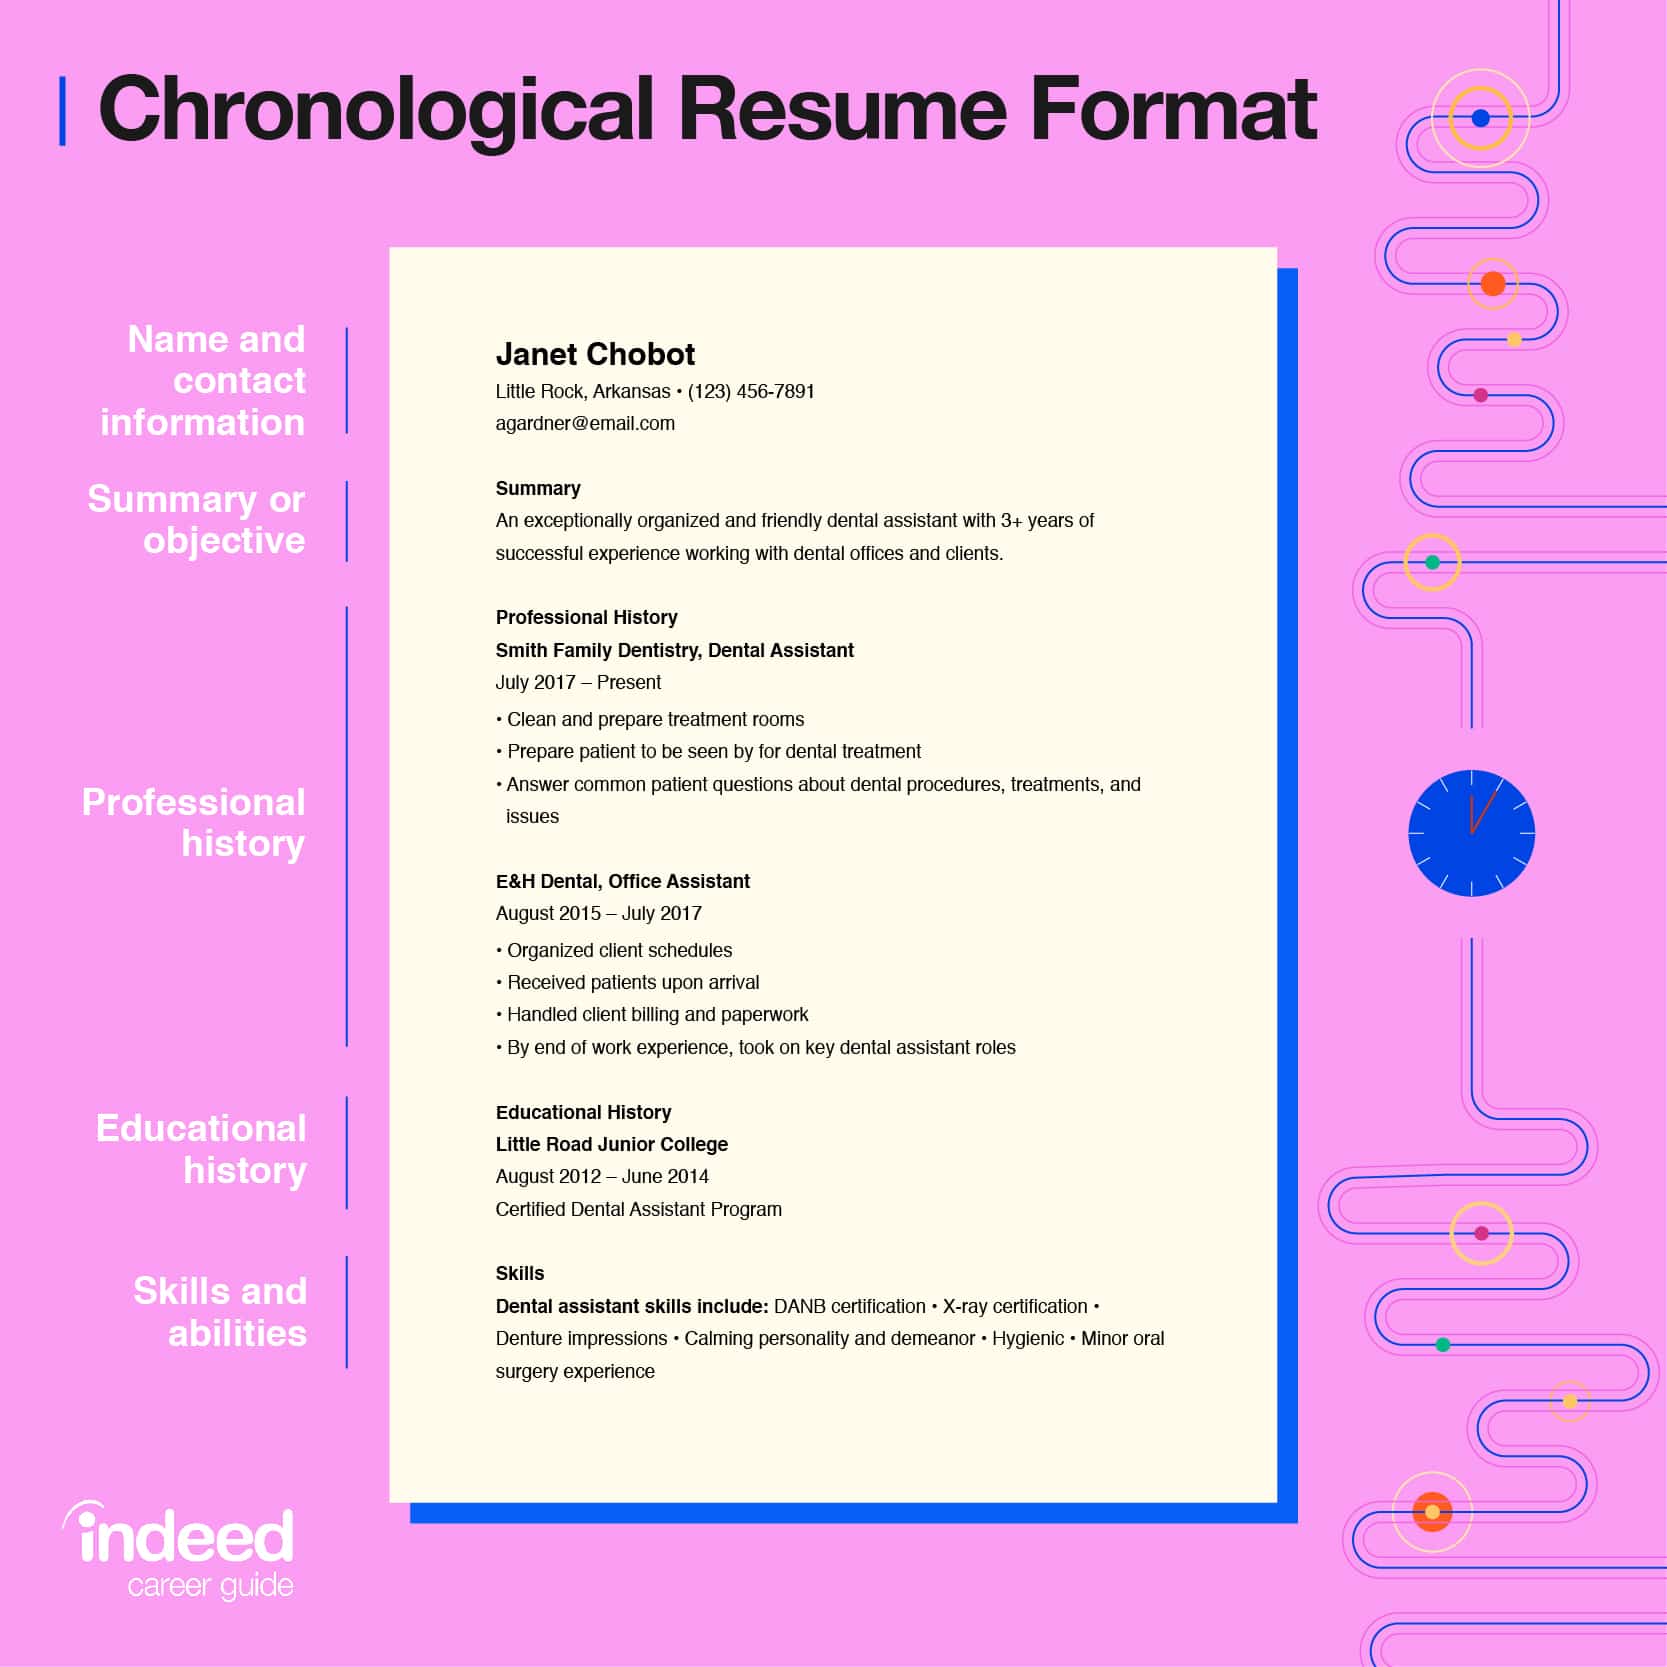 Resume Format Guide (With Tips and Examples)